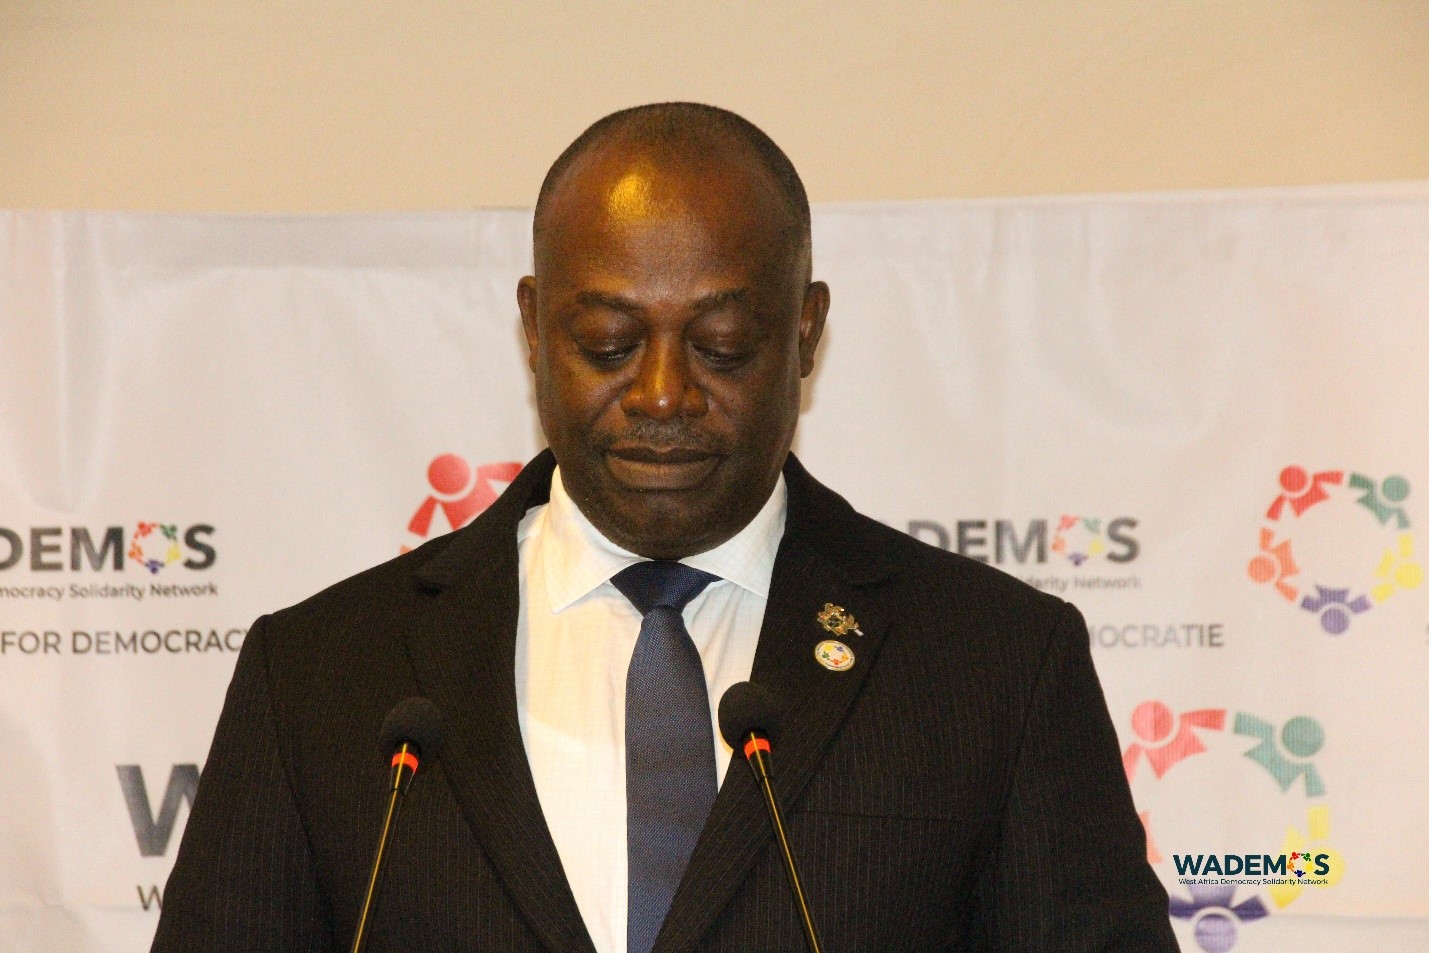 Ghanaian Deputy Minister of Foreign Affairs and Regional Integration, Thomas Mbomba